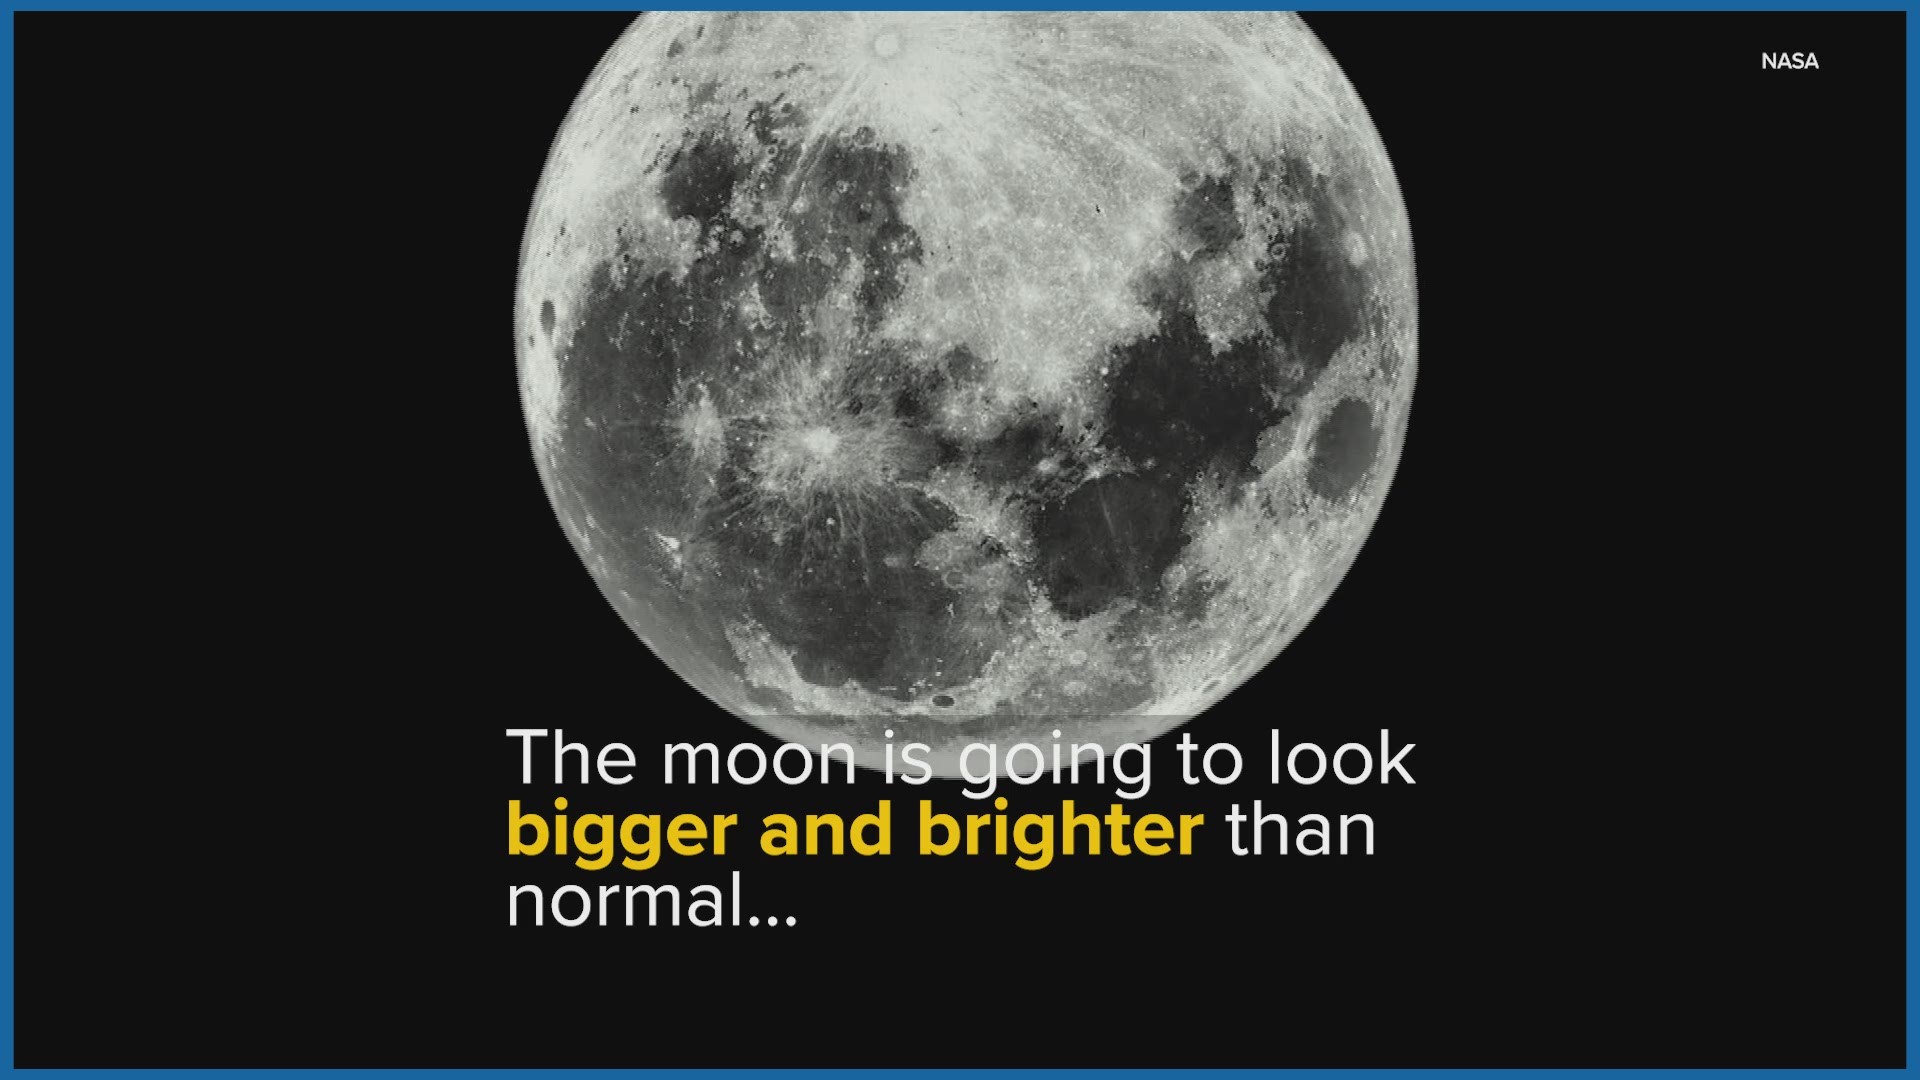 On Feb. 19, the moon will be closer in its orbit to Earth than any other point in 2019.